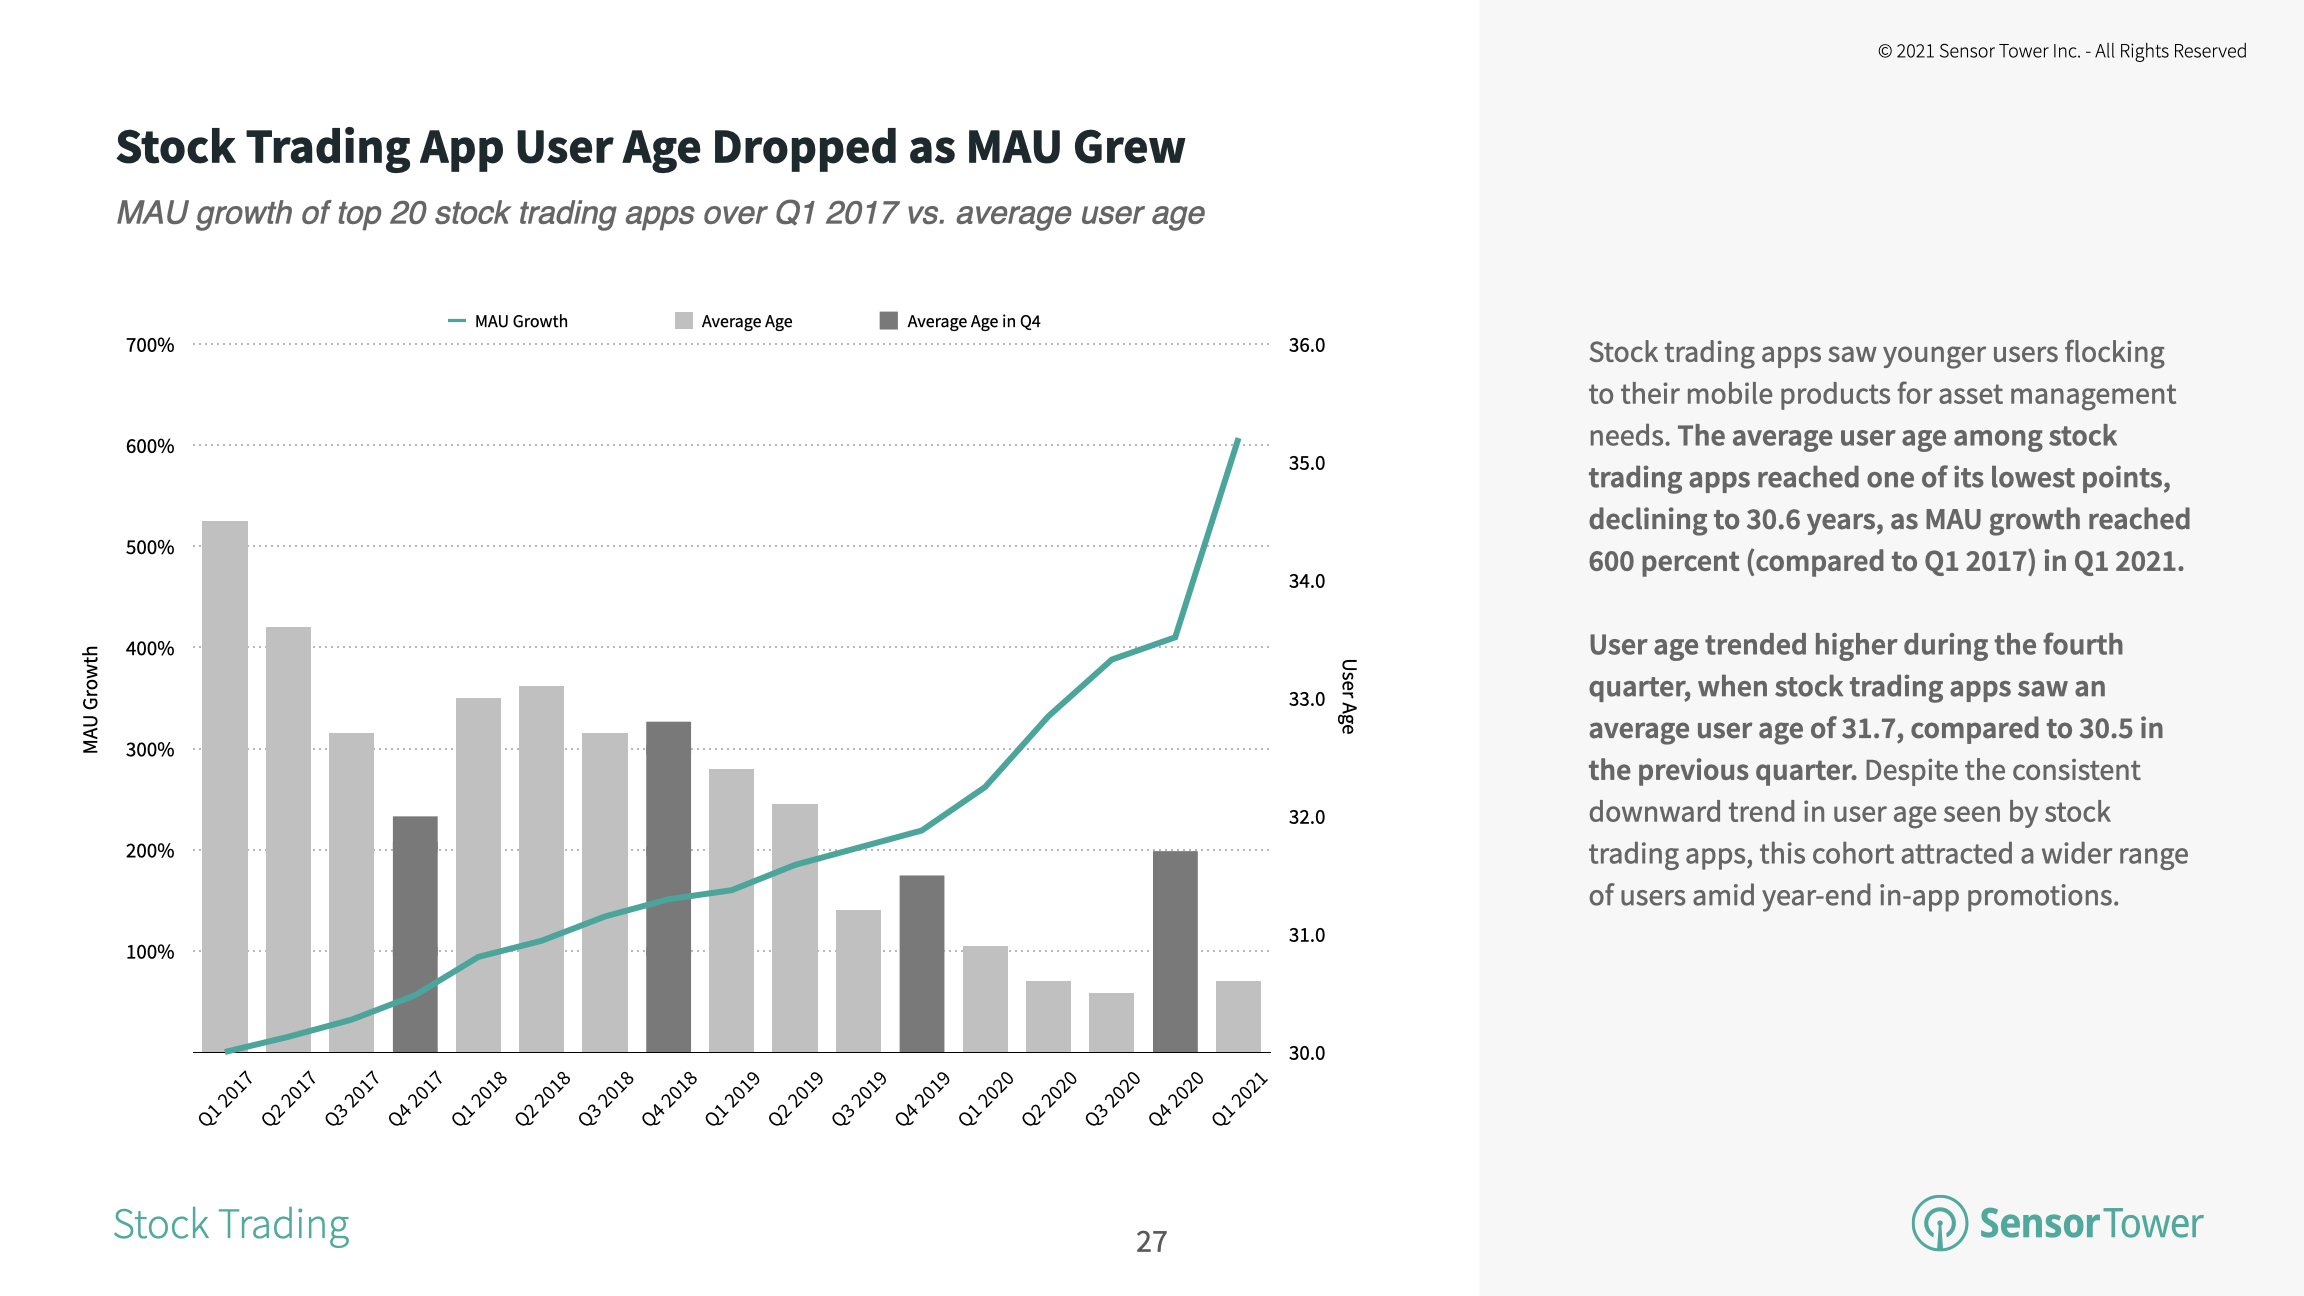 The average user age of the top 20 stock trading apps fell to 30.6 in Q1 2021.